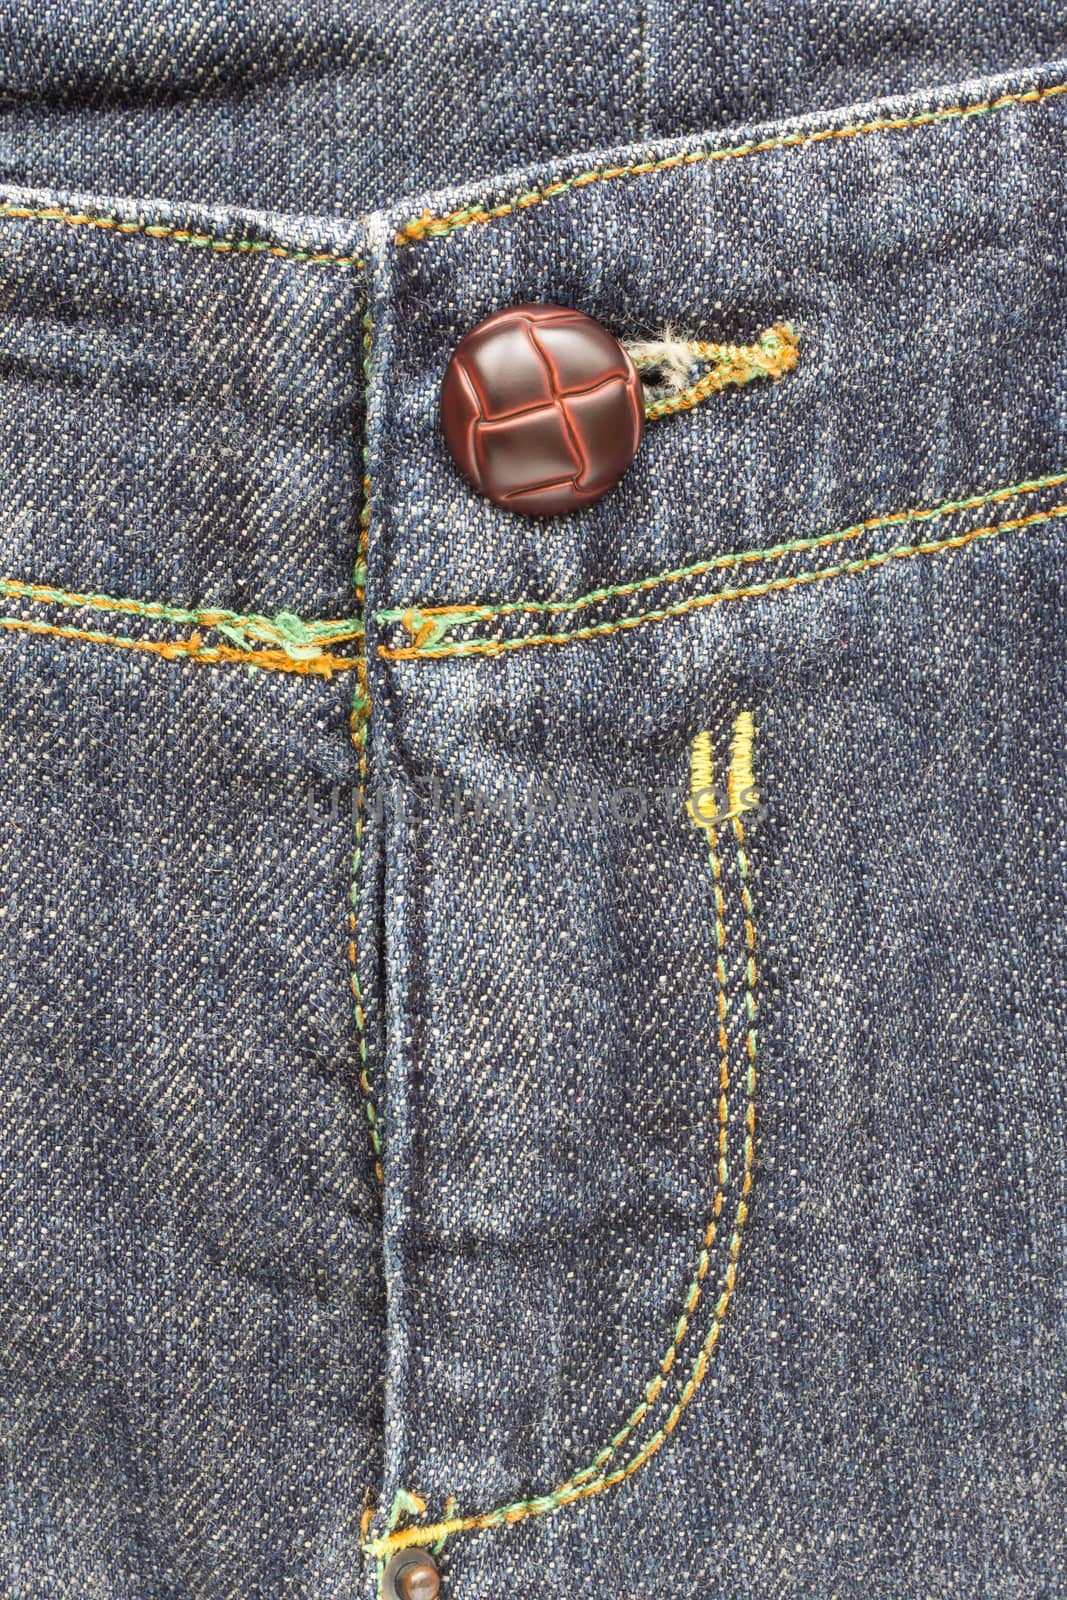 Crotch Jeans Texture Background and Brown Button by steafpong